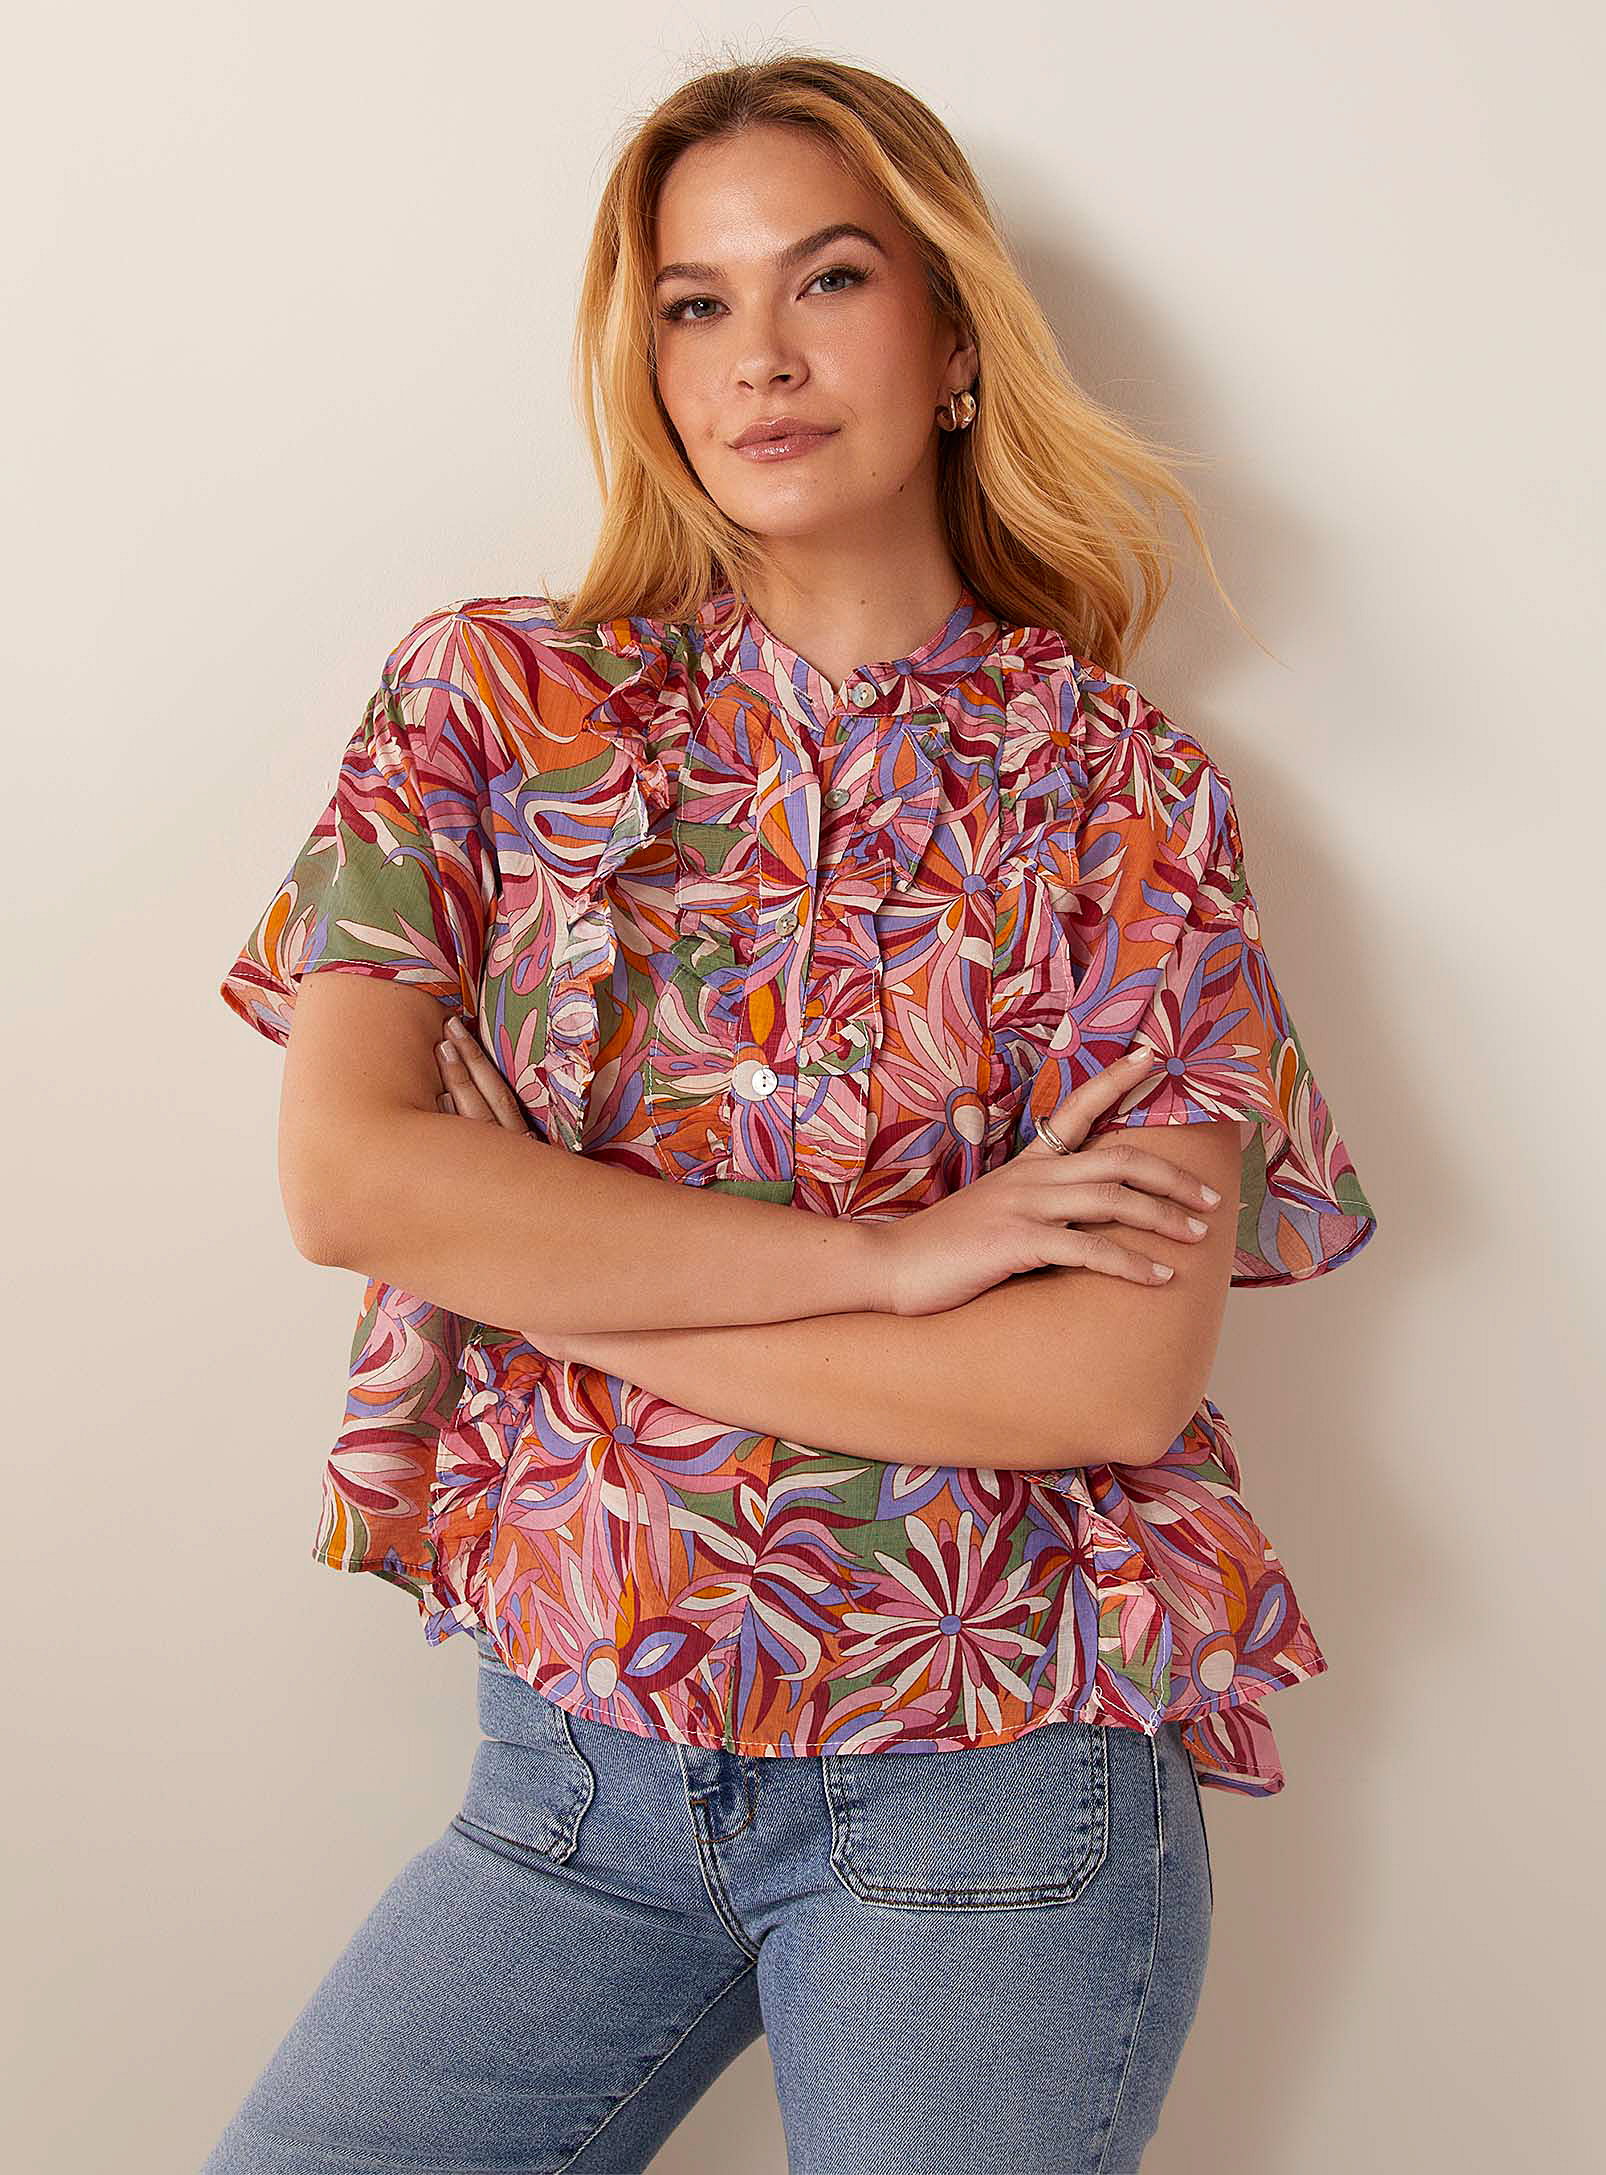 Contemporaine Magical Garden Ruffled Blouse In Assorted